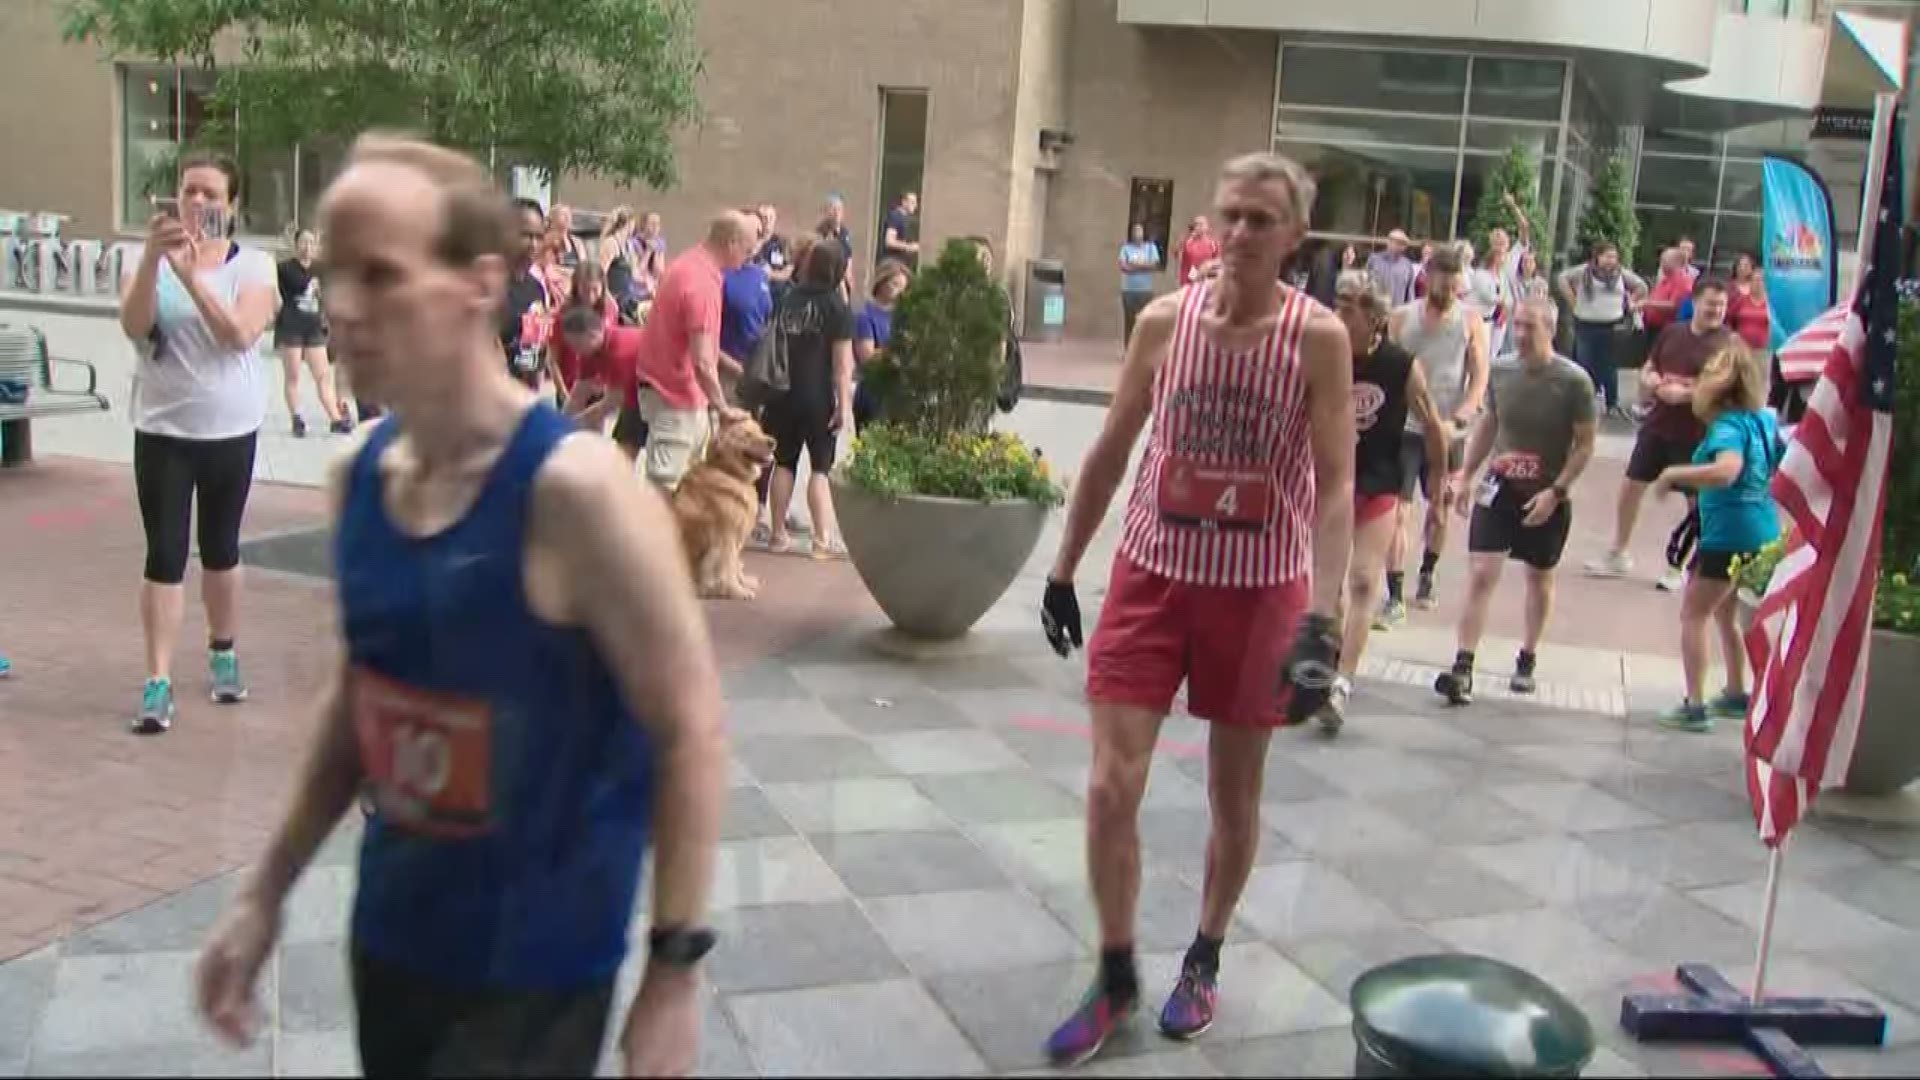 Hundreds participated in the Tunnel to Towers stair climb at the Duke Energy building in uptown Saturday.